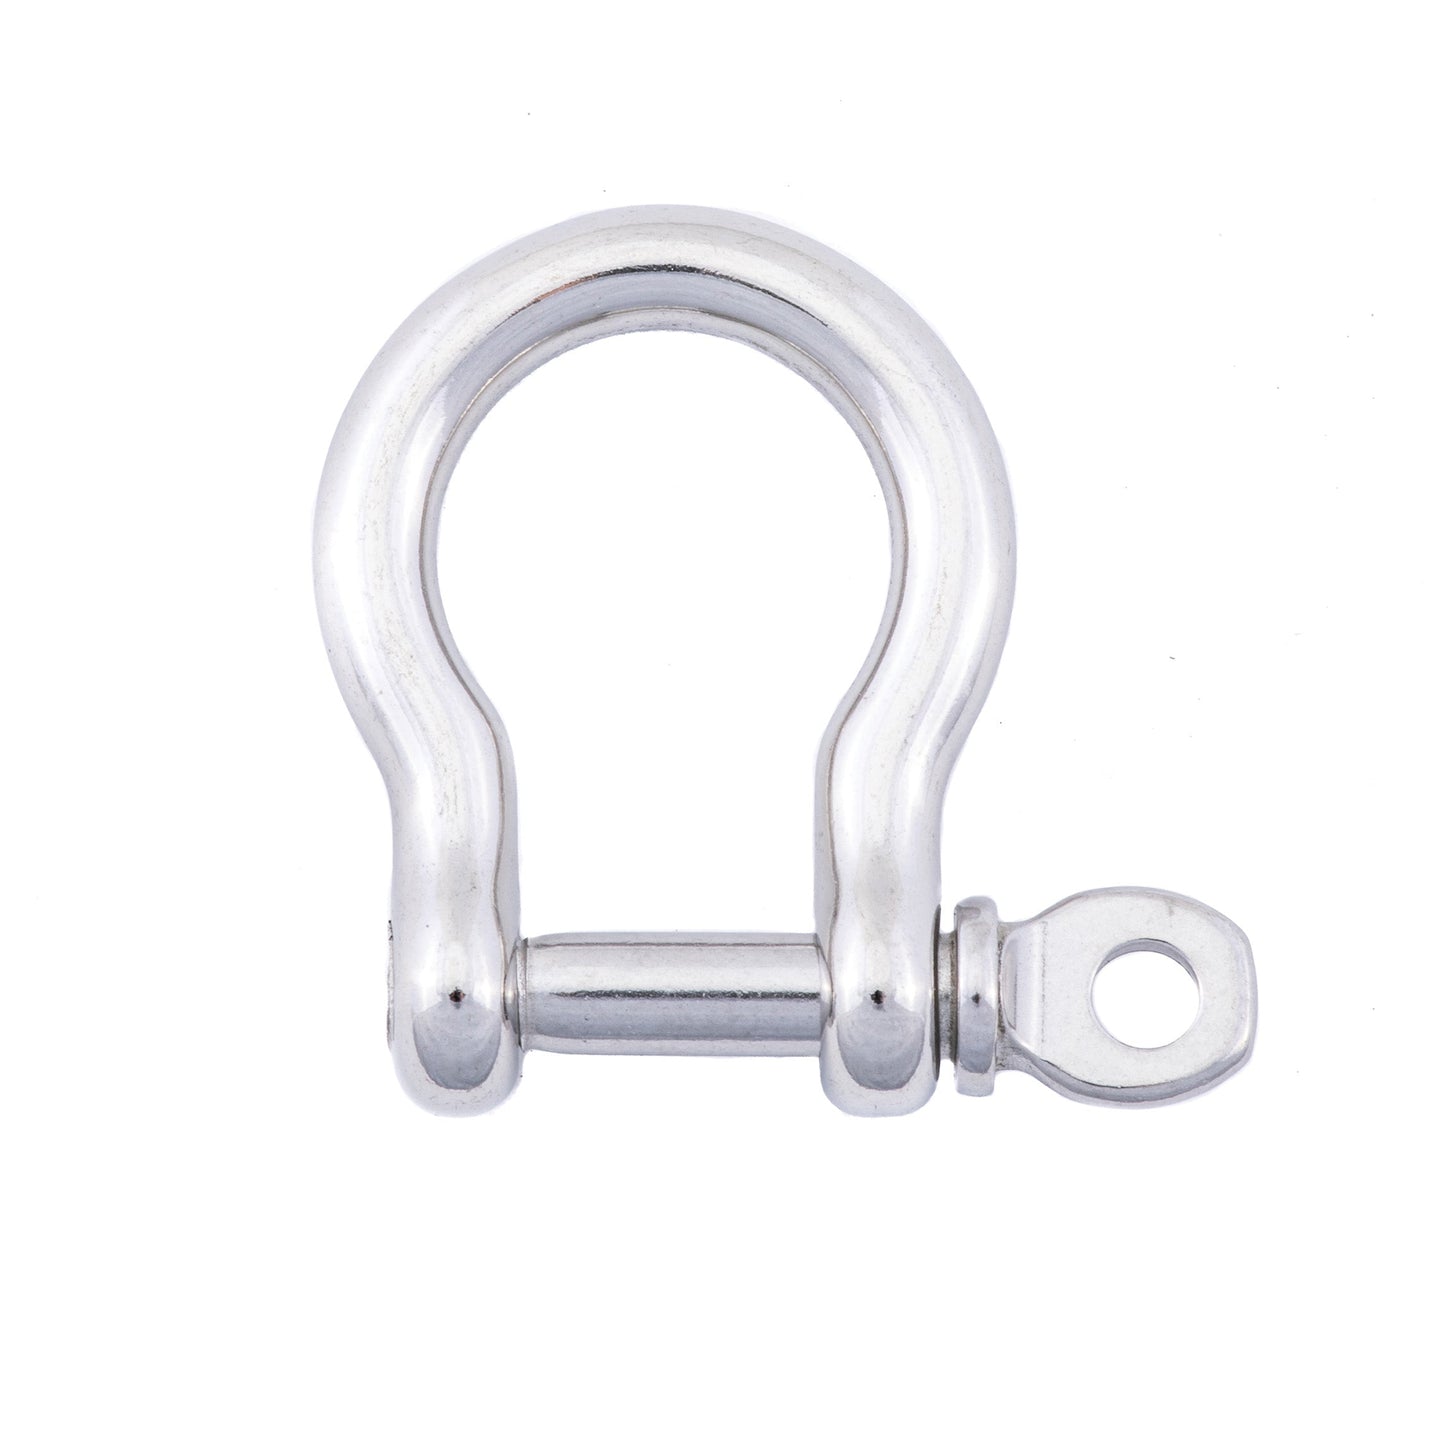 1/4" Stainless Steel Shackle